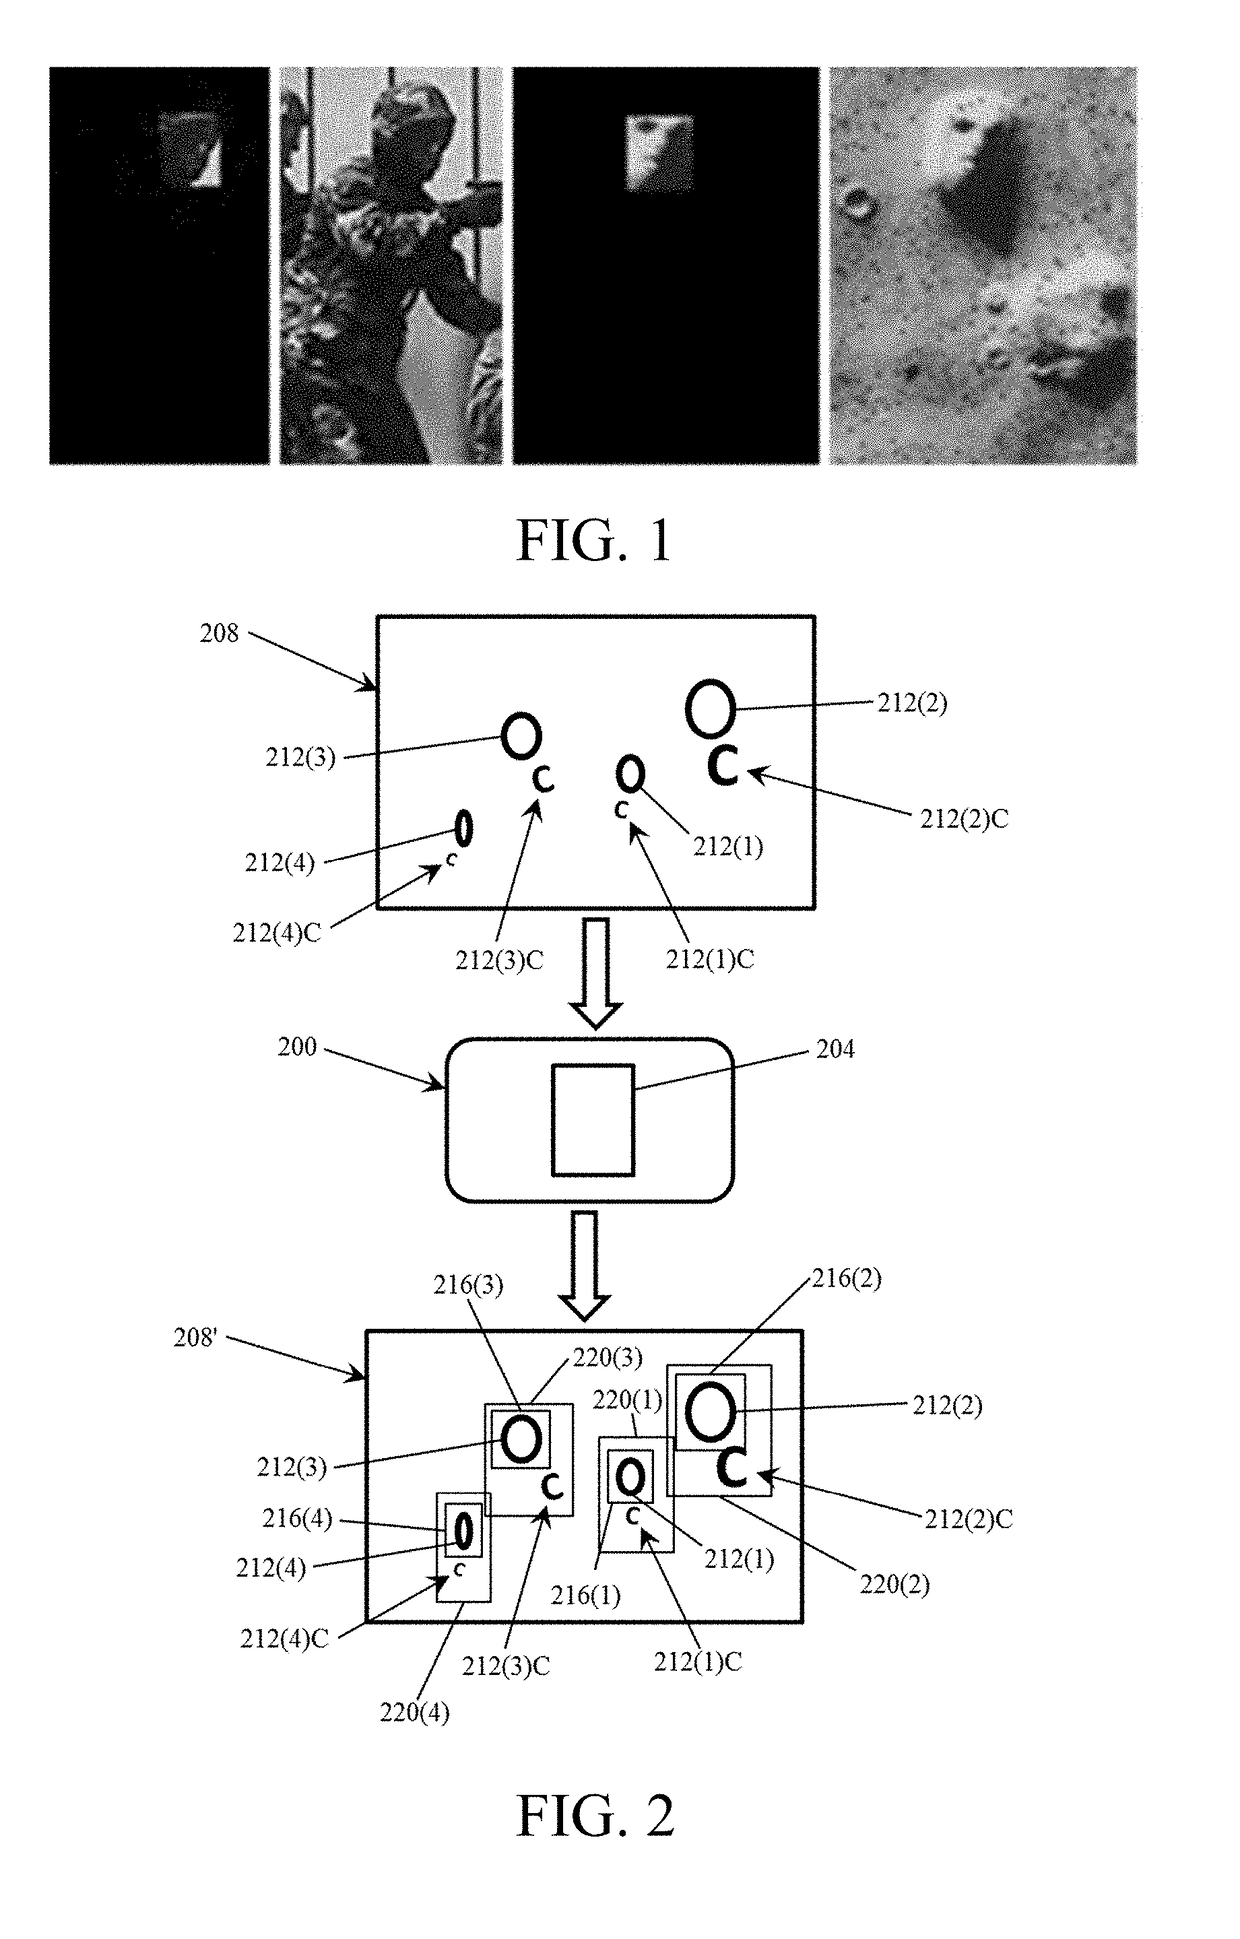 Methods and Software for Detecting Objects in an Image Using Contextual Multiscale Fast Region-Based Convolutional Neural Network